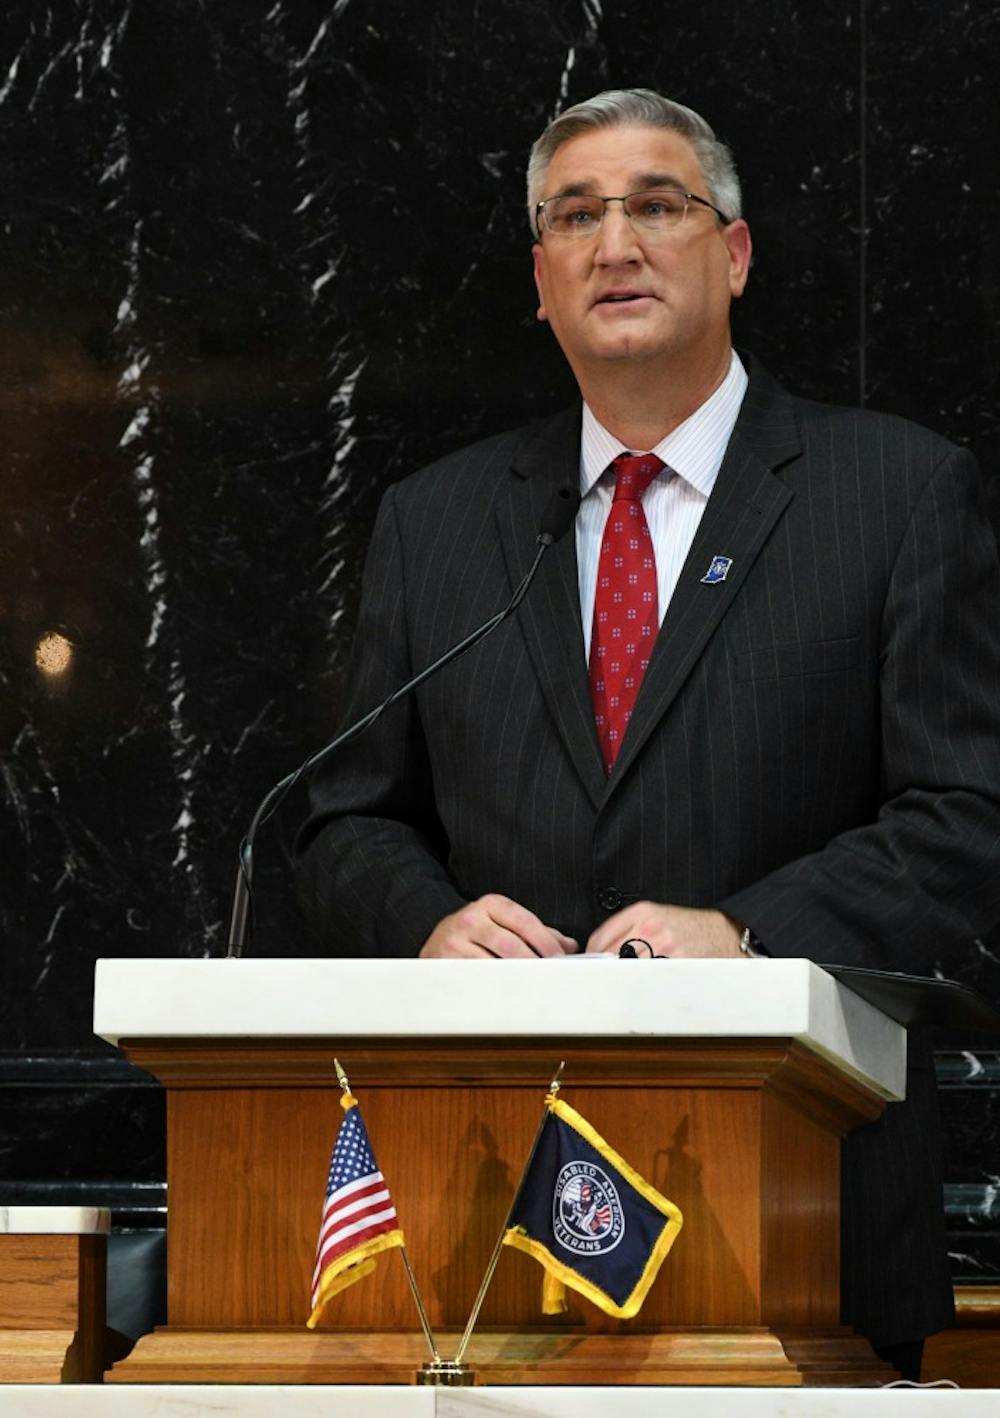 Indiana governor to speak at Ball State commencement